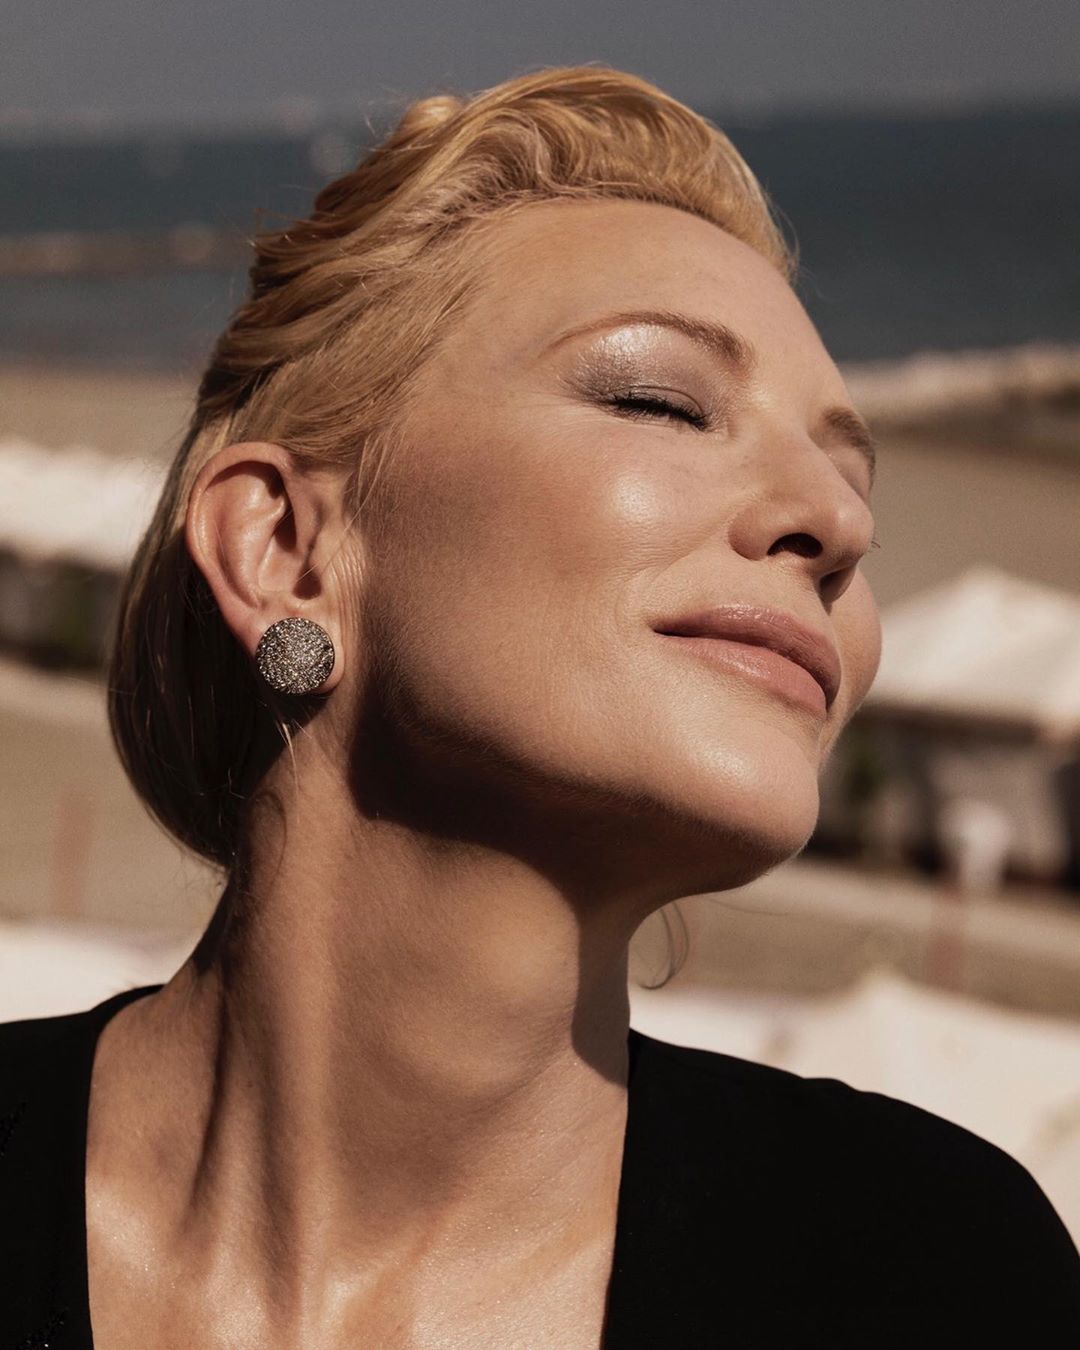 Armani beauty - Behind the scenes at the Venice Film Festival with @gregwilliamsphotography

Radiant Cate Blanchett under the Venetian sun wearing LUMINOUS SILK FOUNDATION in shade 3.

Makeup credits:...